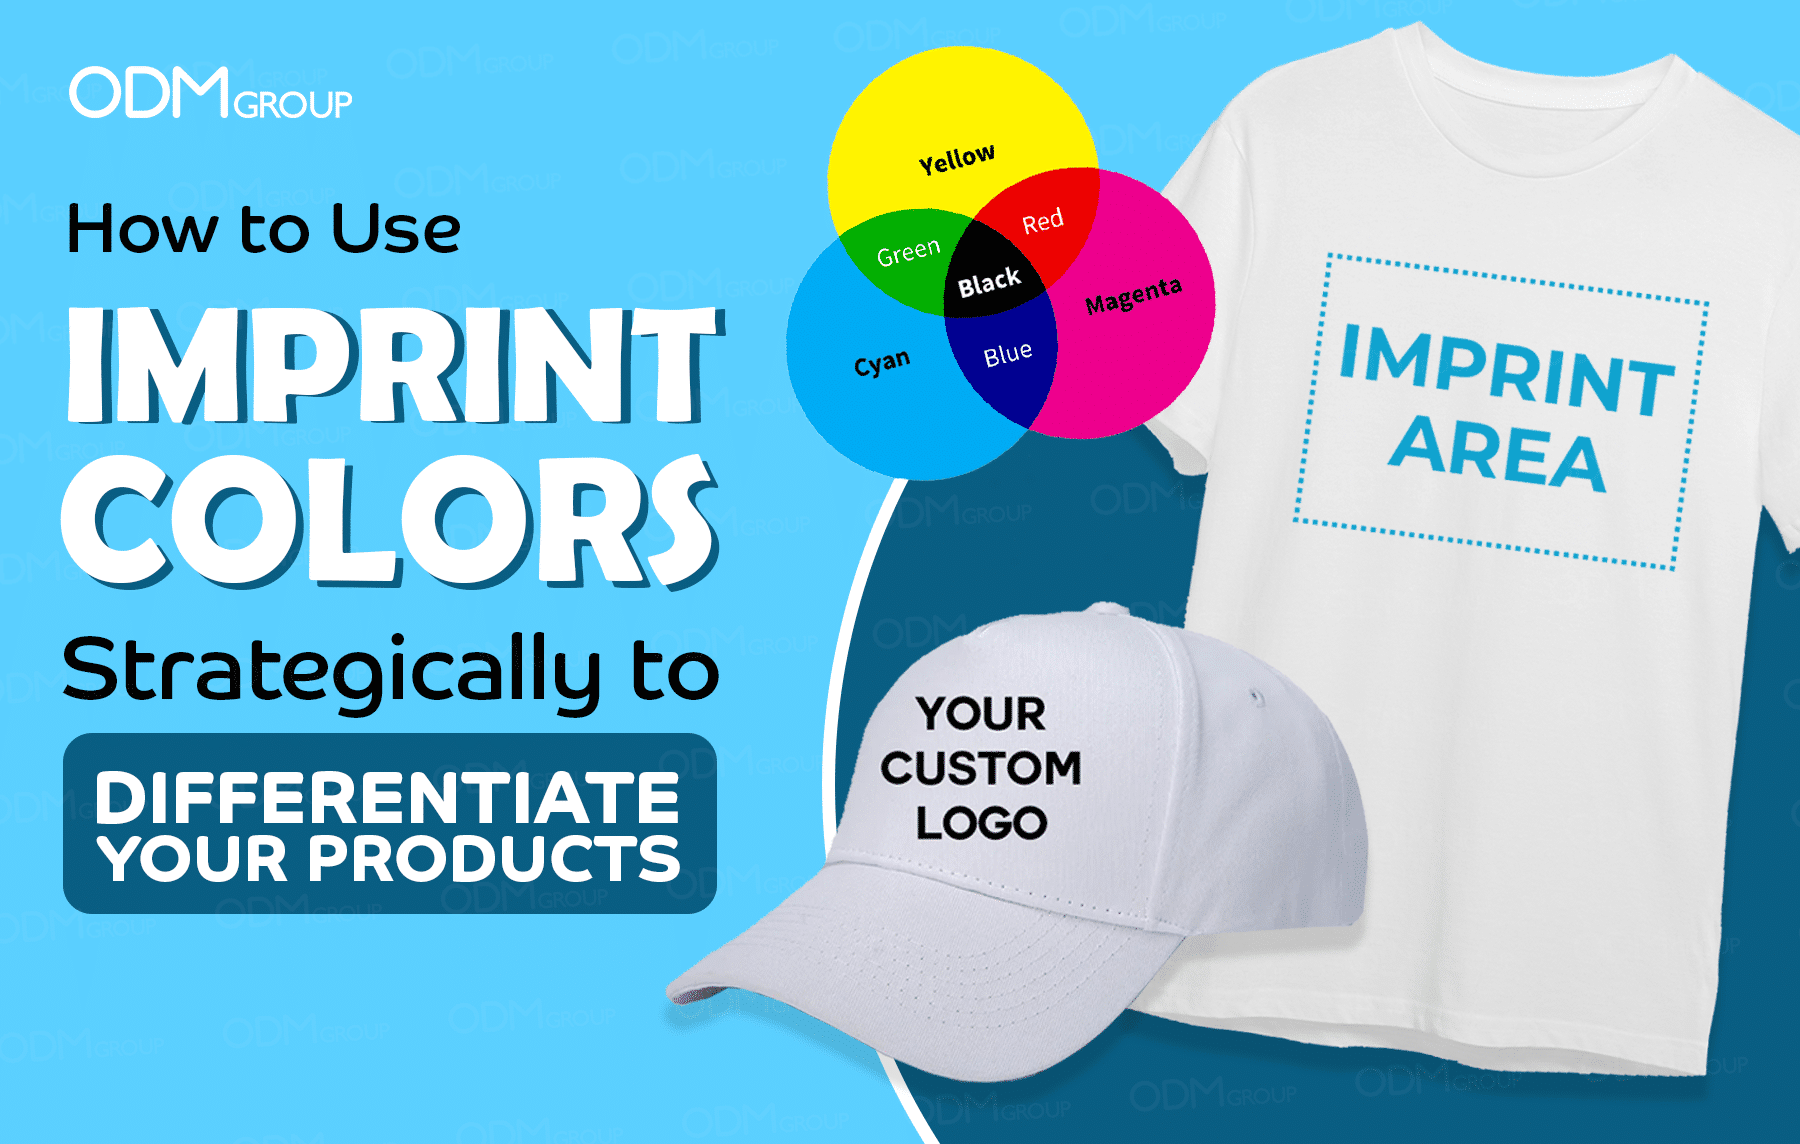 What Are Imprint Colors